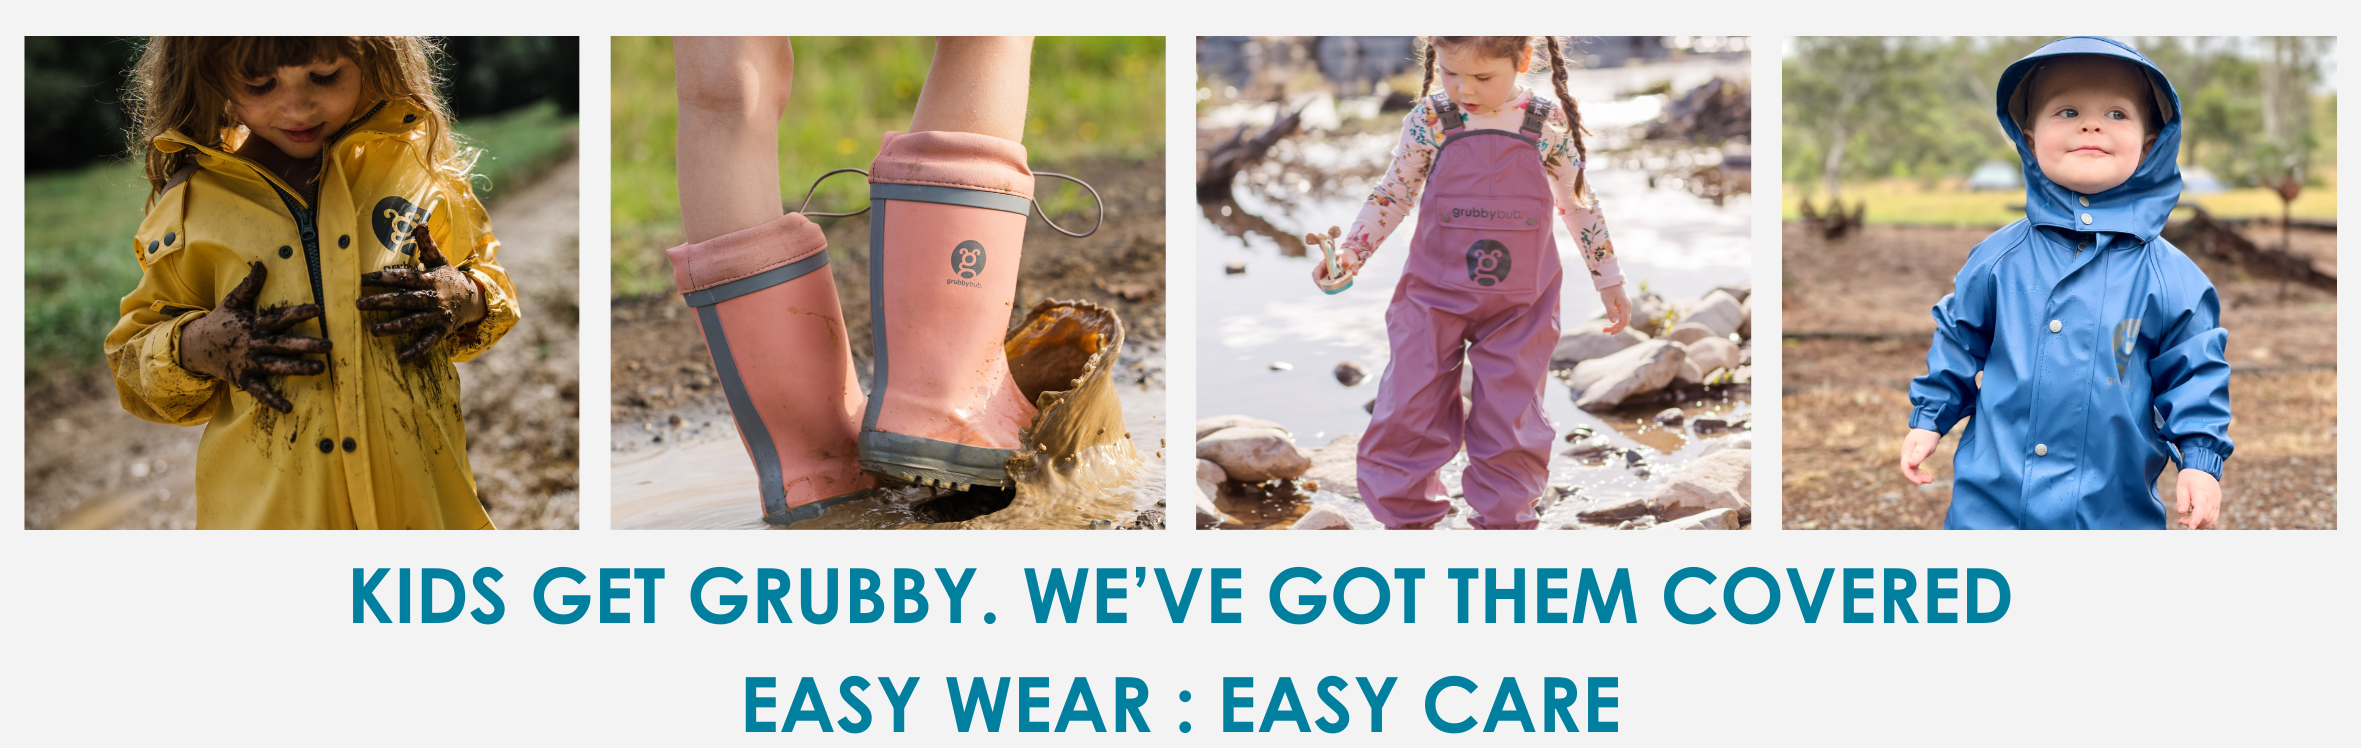 Four images of children and toddlers wearing nature play suits, kids waterproof suits, gumboots and water play clothes